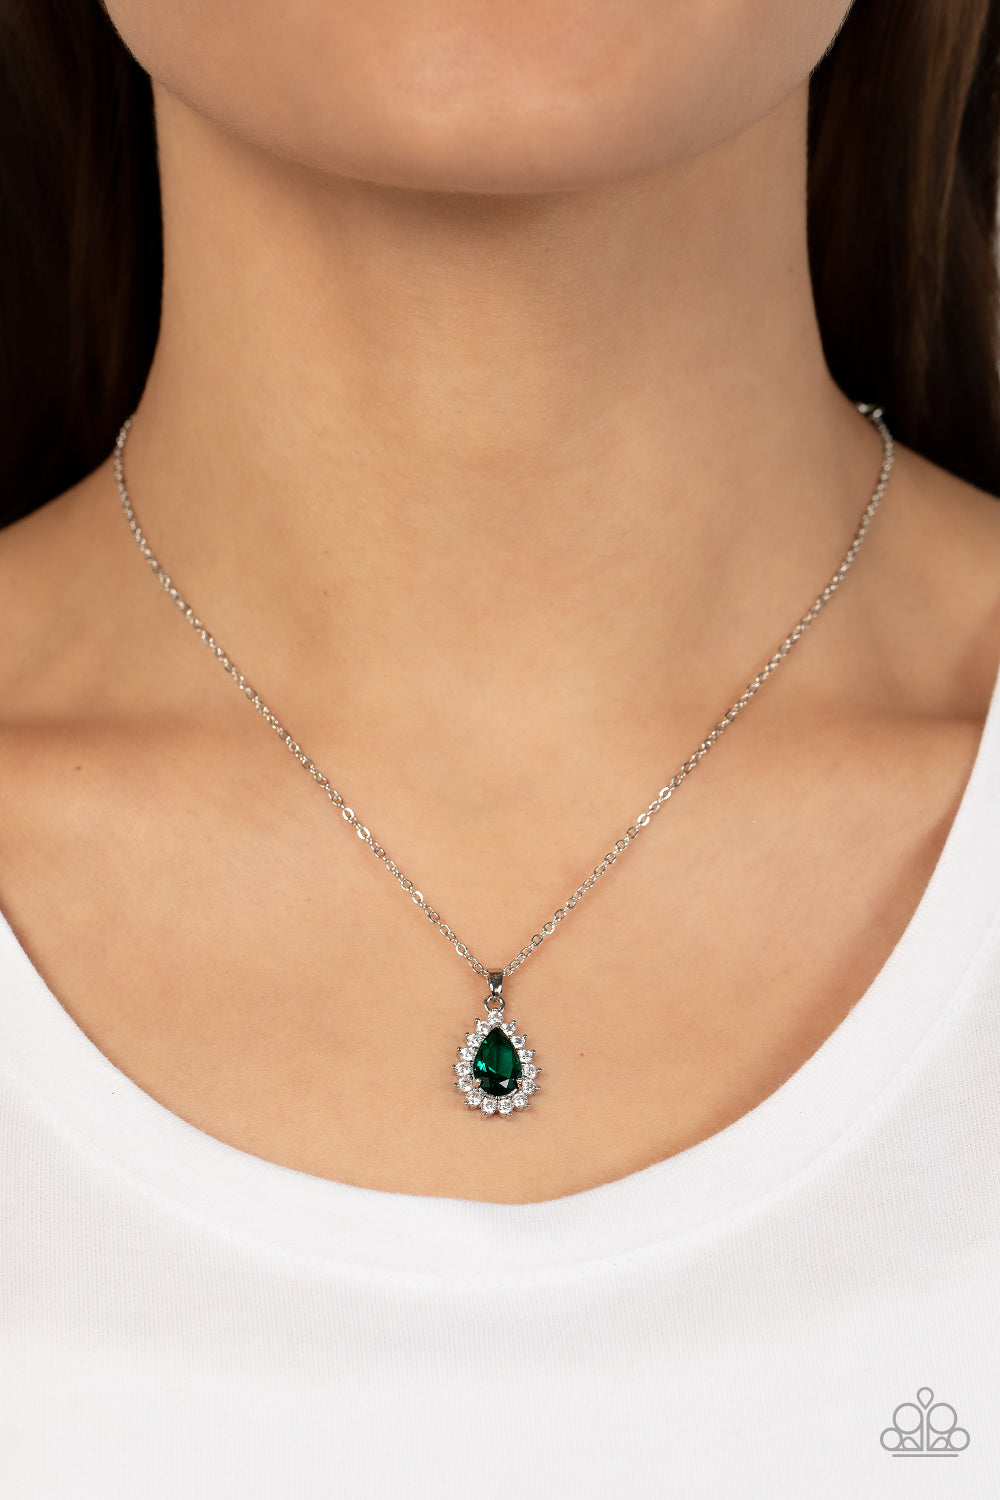 A Guiding SOCIALITE Green Necklace - Paparazzi Accessories   A glassy green teardrop is bordered in sparkly white rhinestones, creating a timelessly dainty pendant below the collar. Features an adjustable clasp closure.  Sold as one individual necklace. Includes one pair of matching earrings.